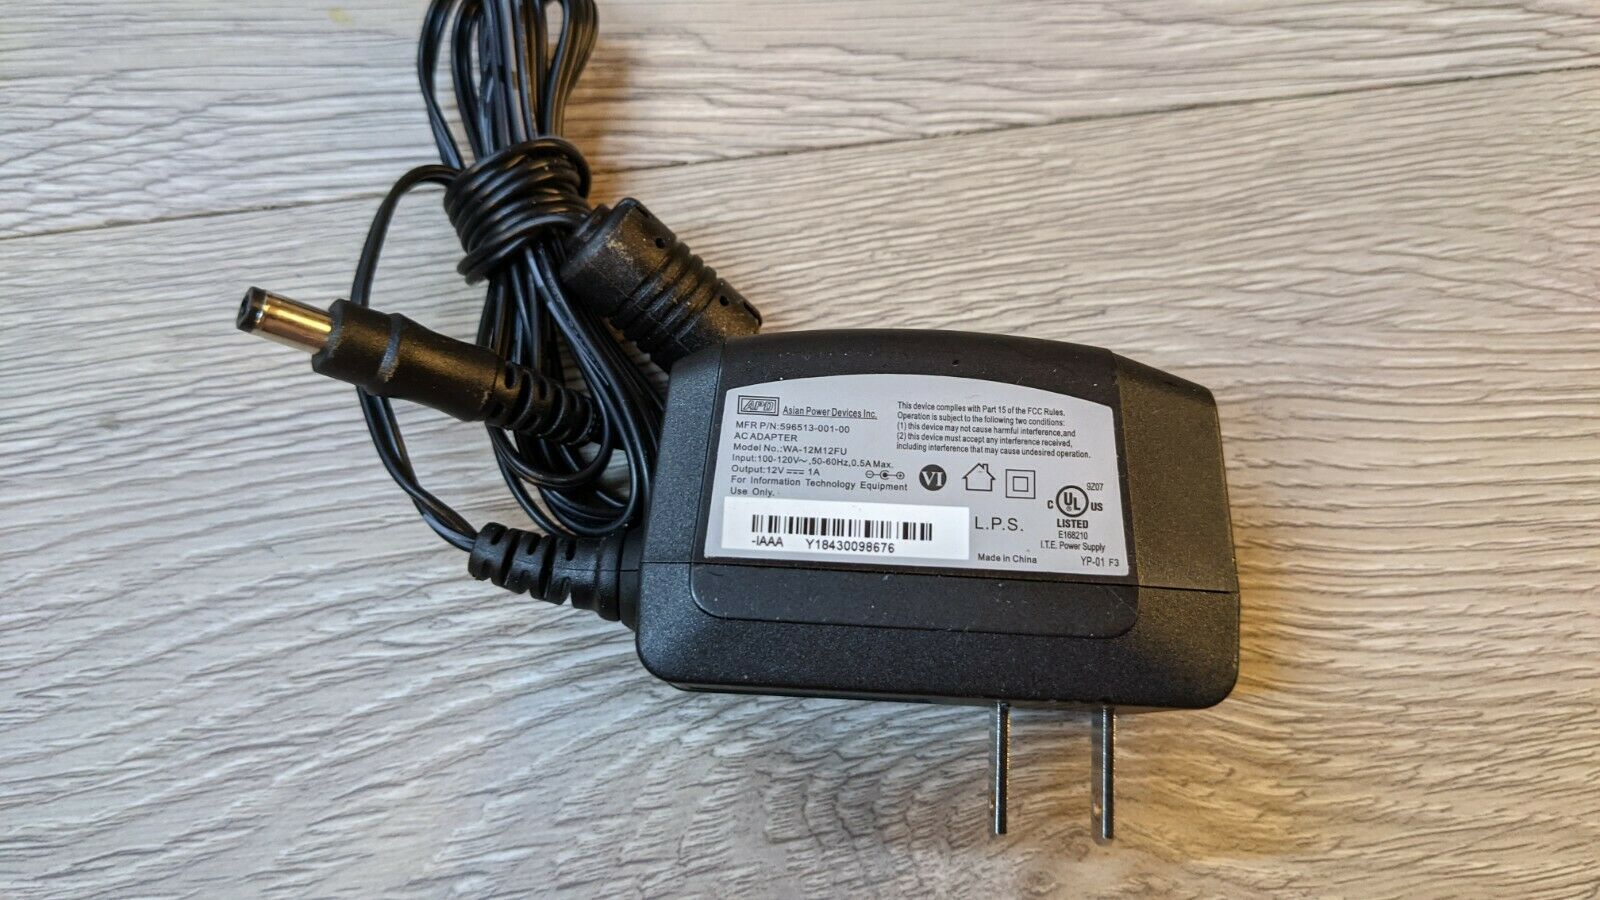 12V Asian Power Devices APD WA-12M12FU AC Adapter Power Supply Connection Split/Duplication: 1:2 MPN: 596513-004-00 T - Click Image to Close